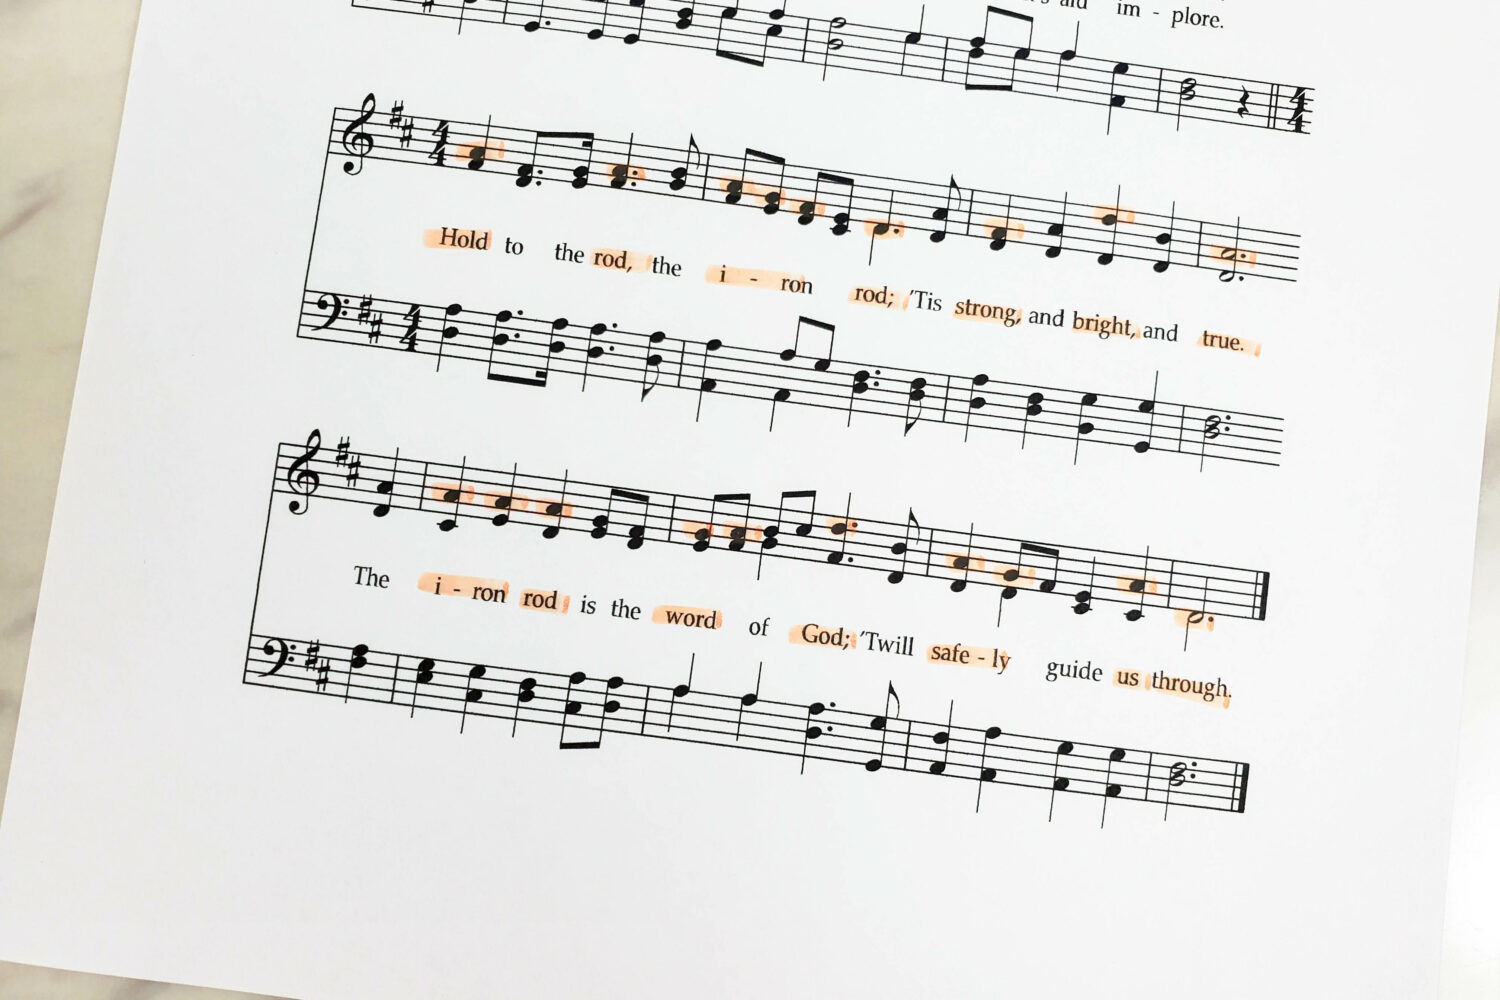 The Iron Rod Pipe Chimes chart singing time idea! Head over to grab this printable chime charts to help teach the hymn The Iron Rod in your Primary room! Great tie in to the theme of the song with these metal pipe chimes as an engaging activity for your kiddos.